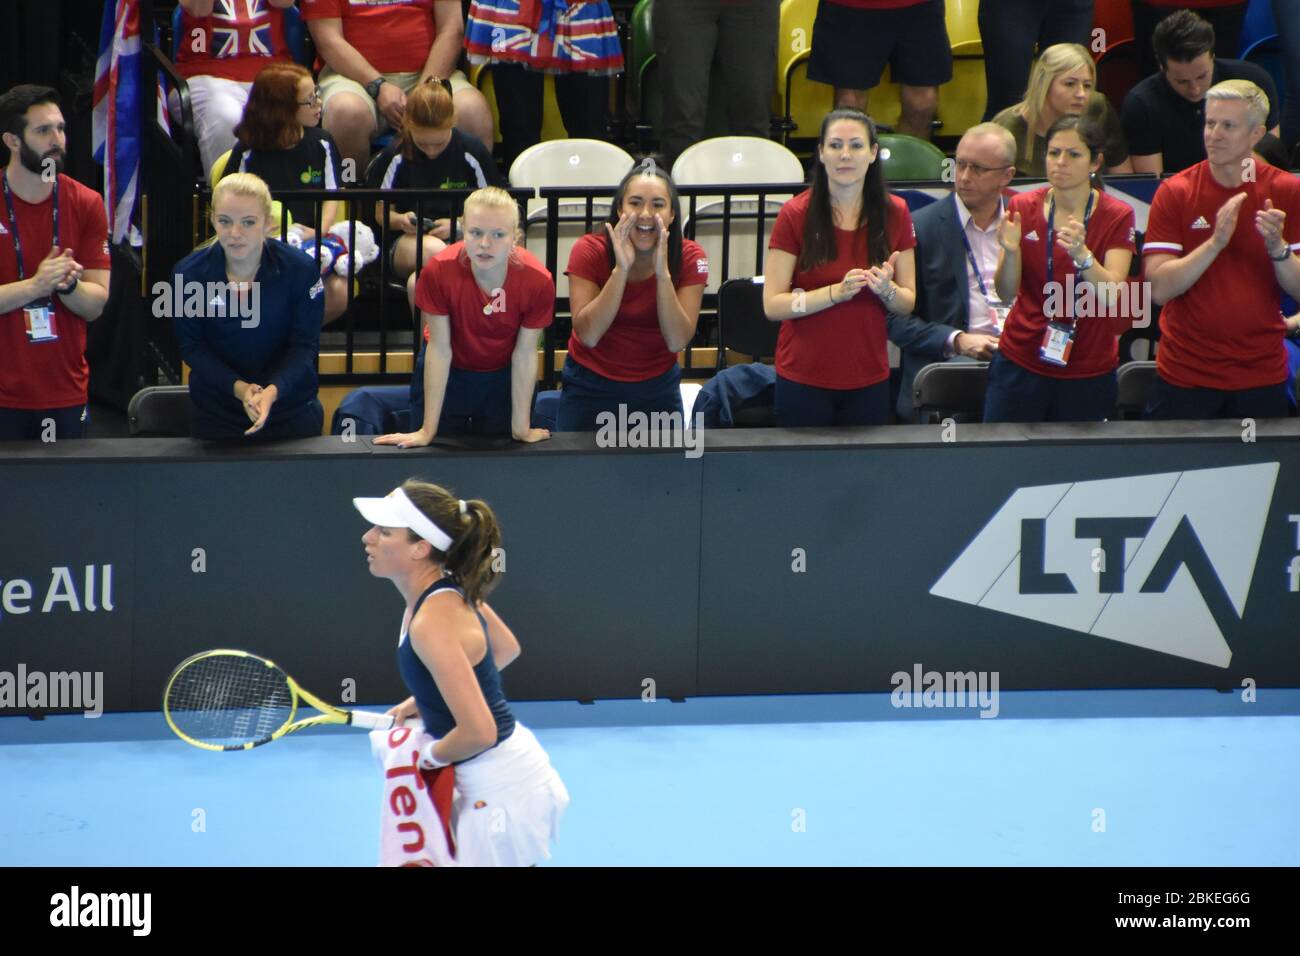 Team GB cheering on Johanna Konta in their Fed Cup match against Kazakhstan on the 21st of April 2019 at the Copper Box Arena, London, England, UK Stock Photo